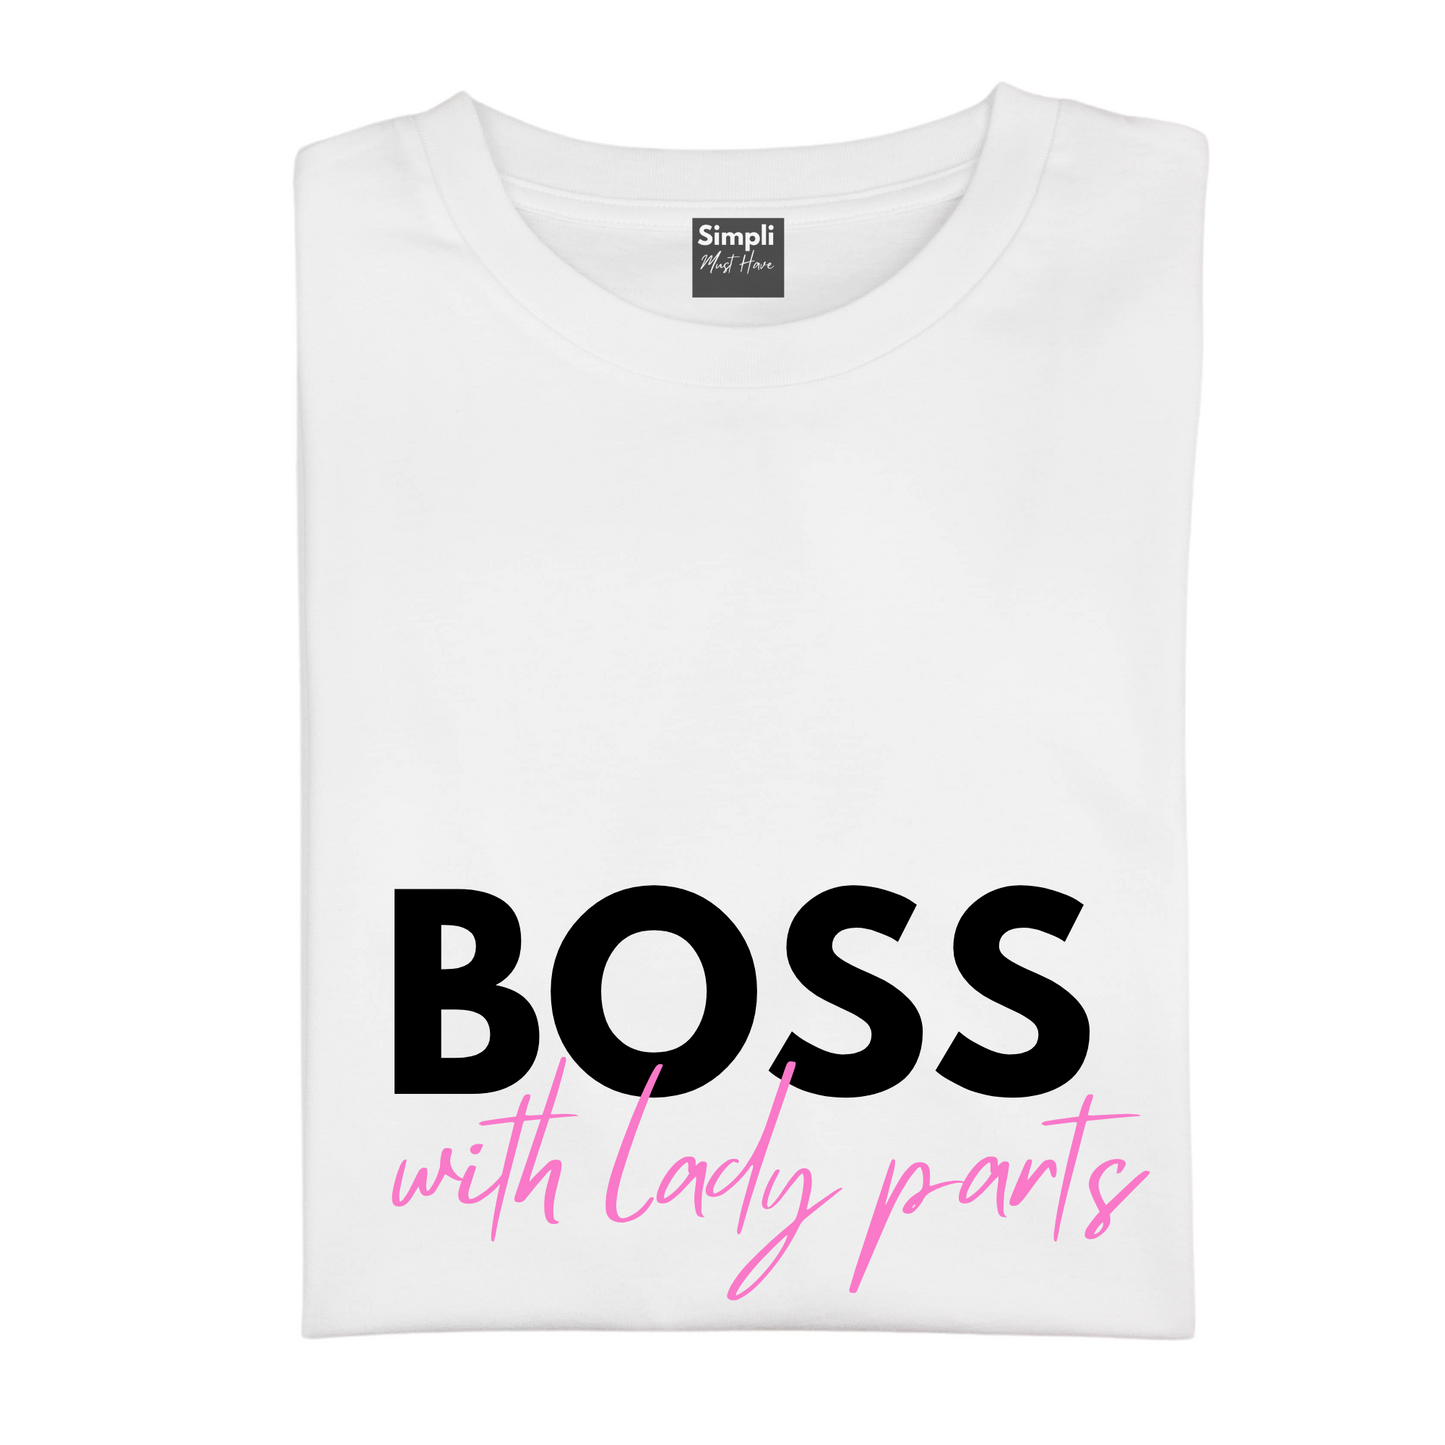 BOSS with Lady Parts Tee